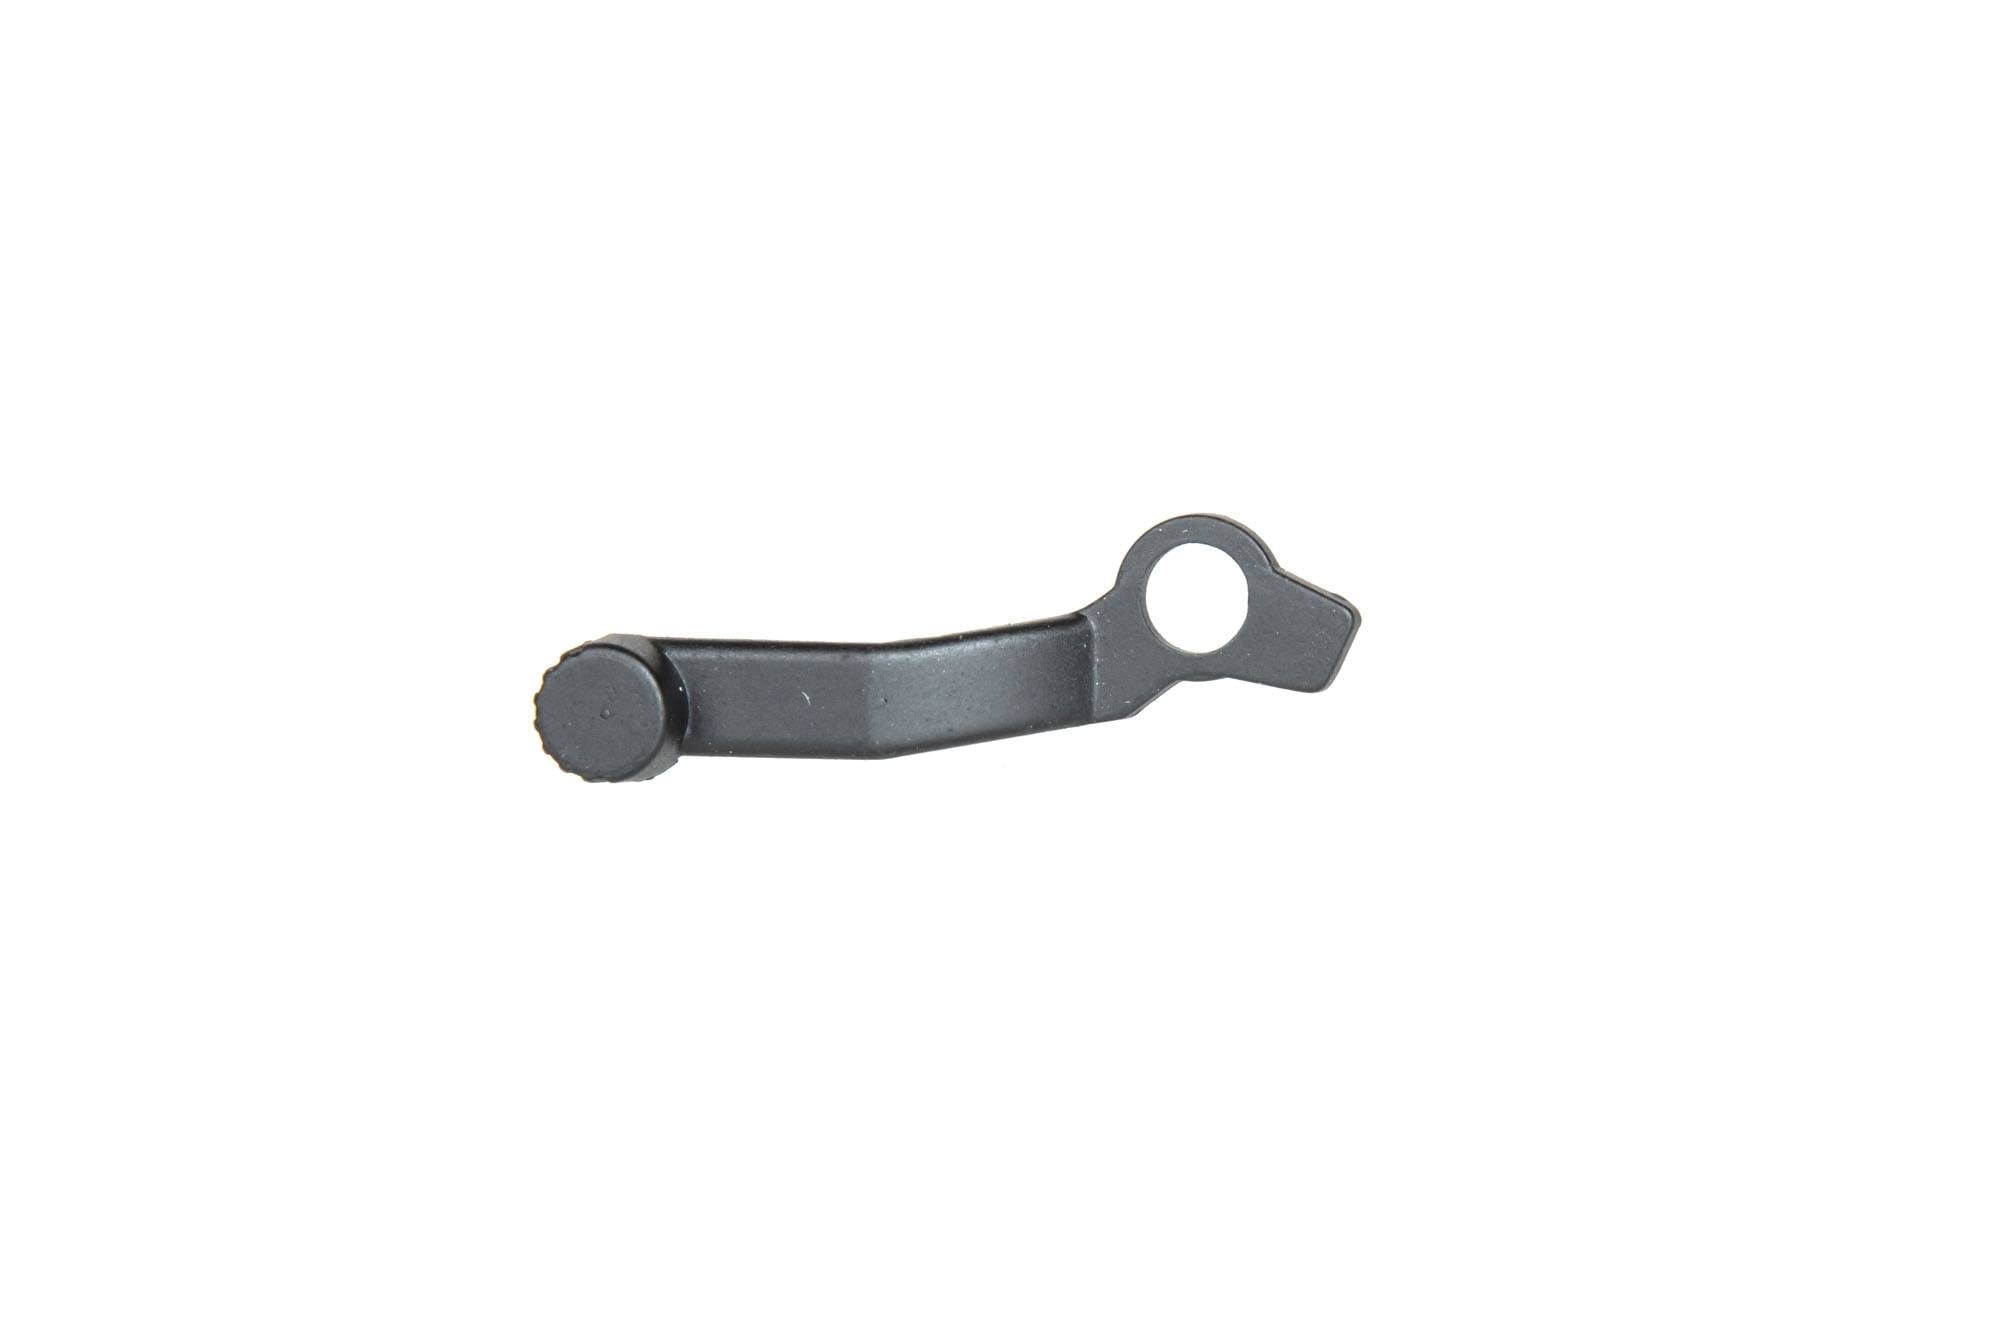 Safety lever for SA-S02/S03 / VSR replicas